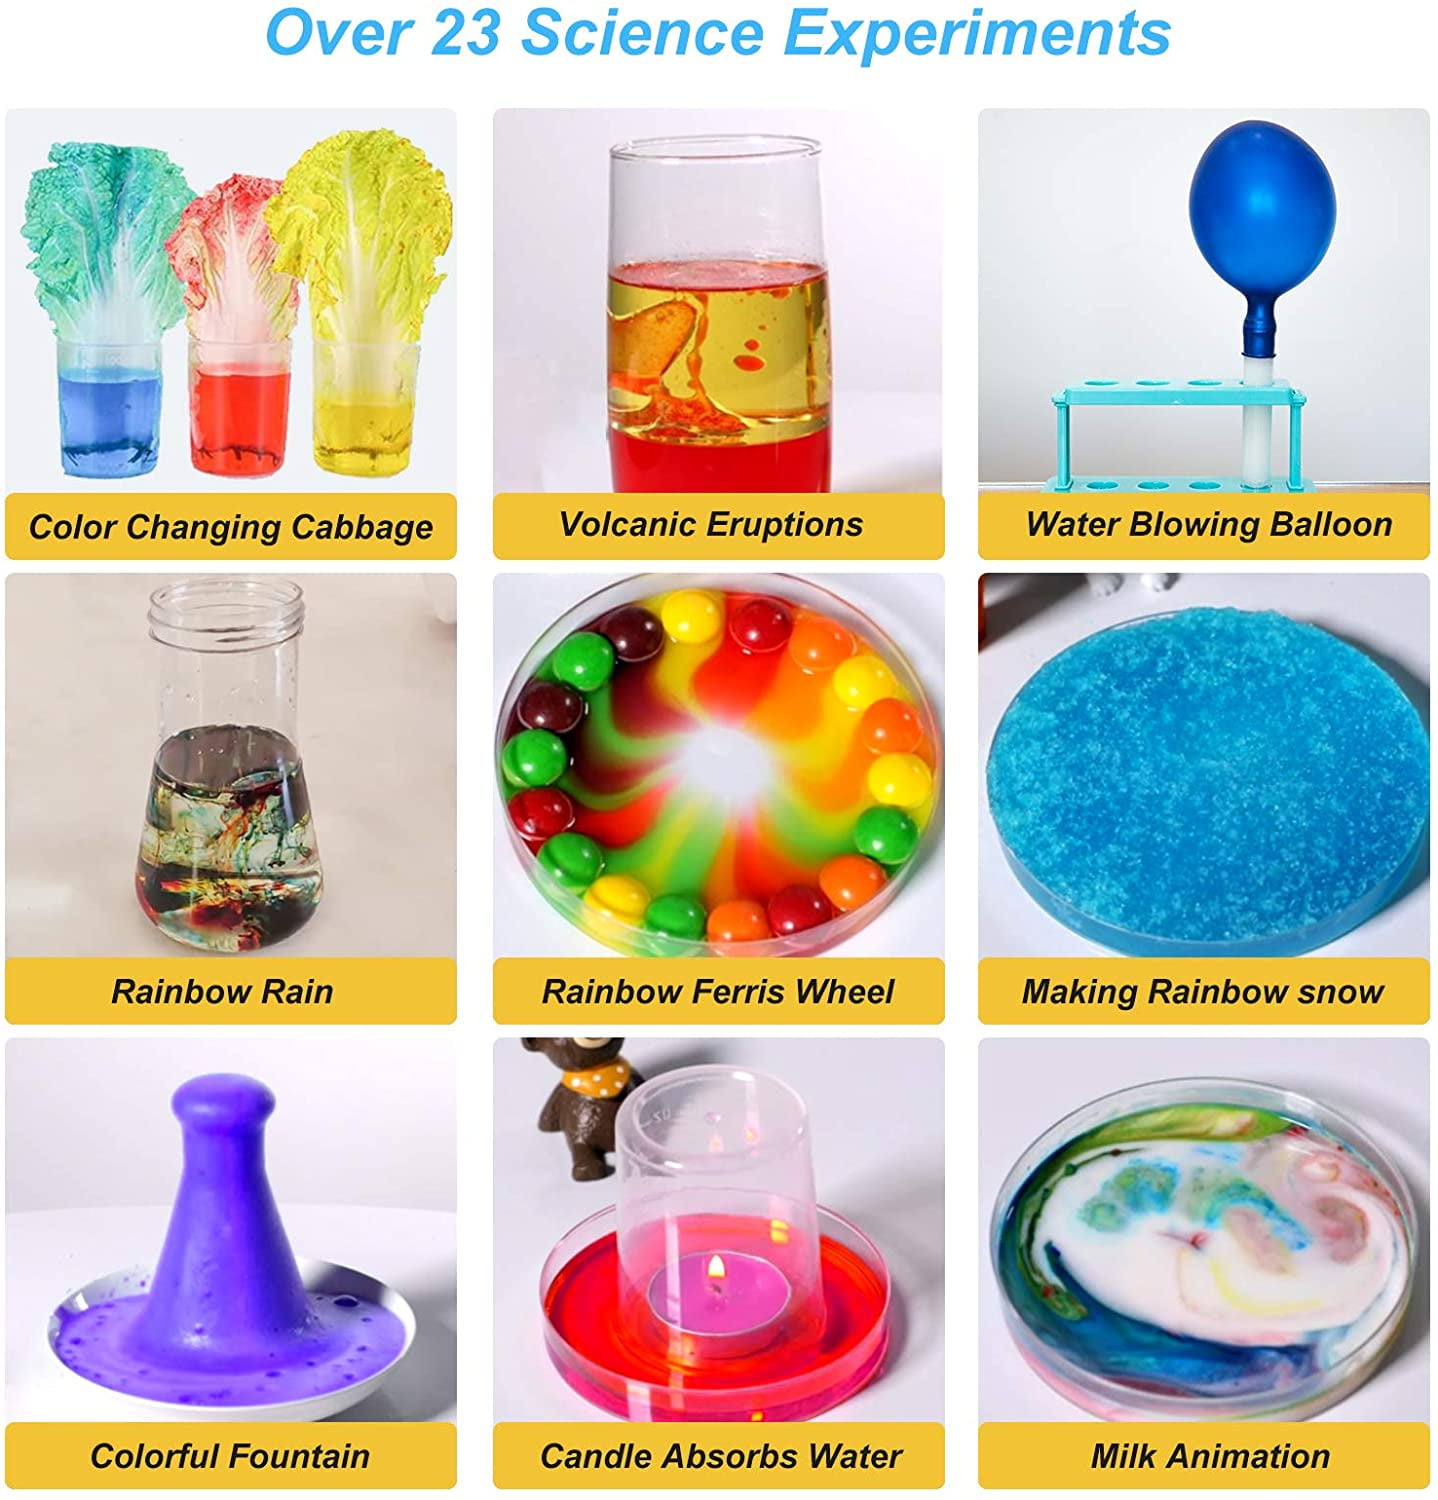 Chemistry Lab Stem Homily Science Kit For Kids With Over 23 Science Experiments 